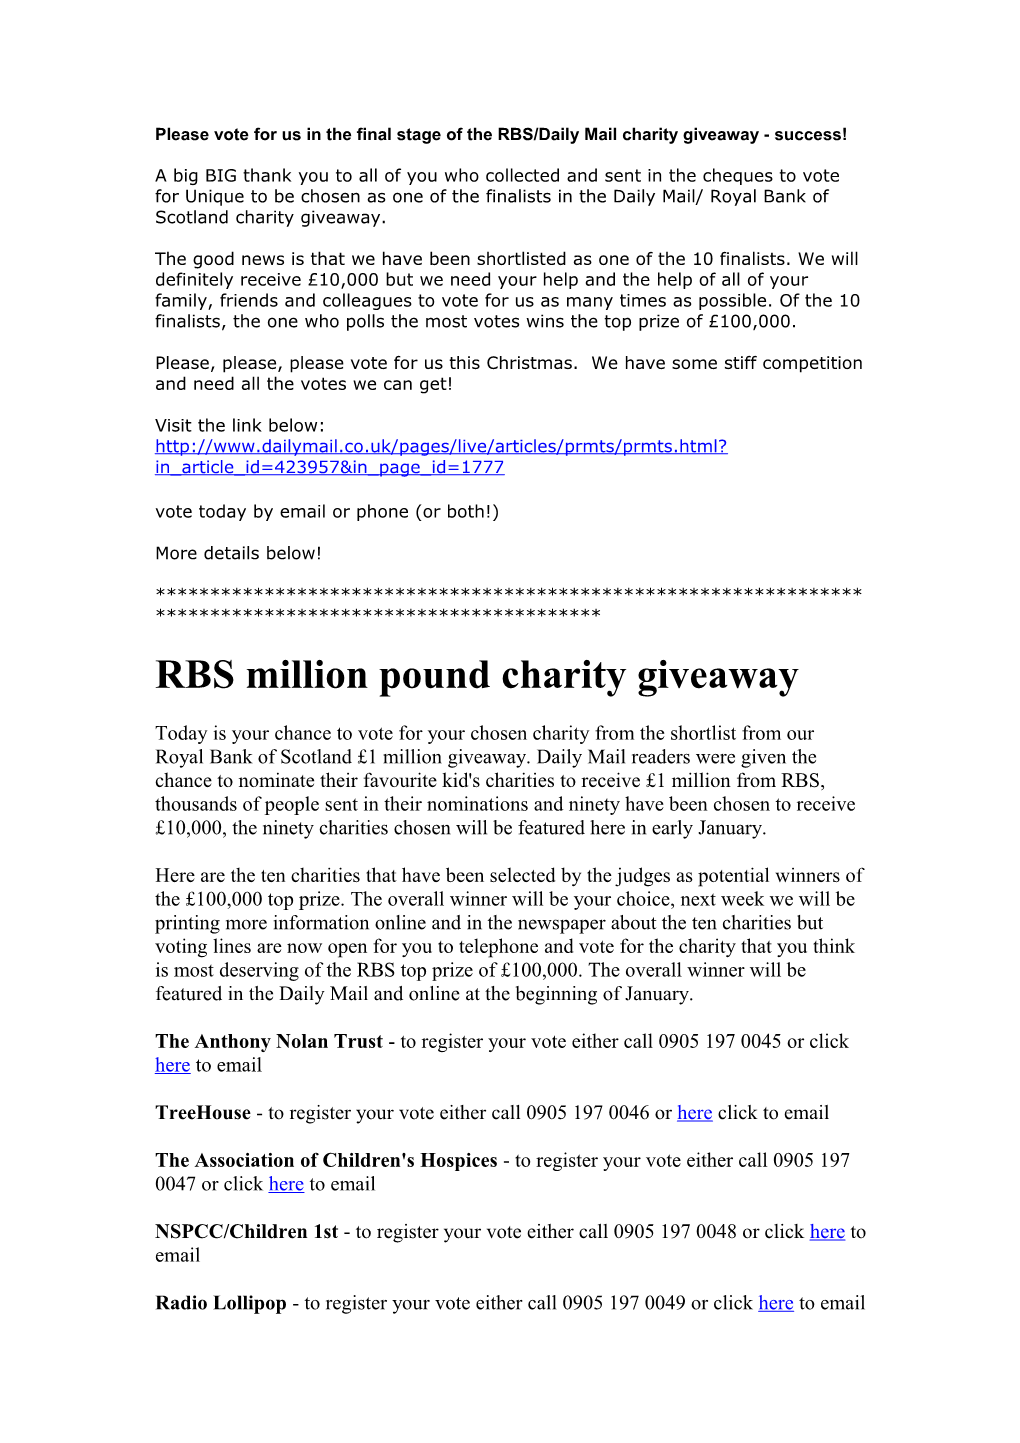 Please Vote for Us in the Final Stage of the RBS/Daily Mail Charity Giveaway - Success